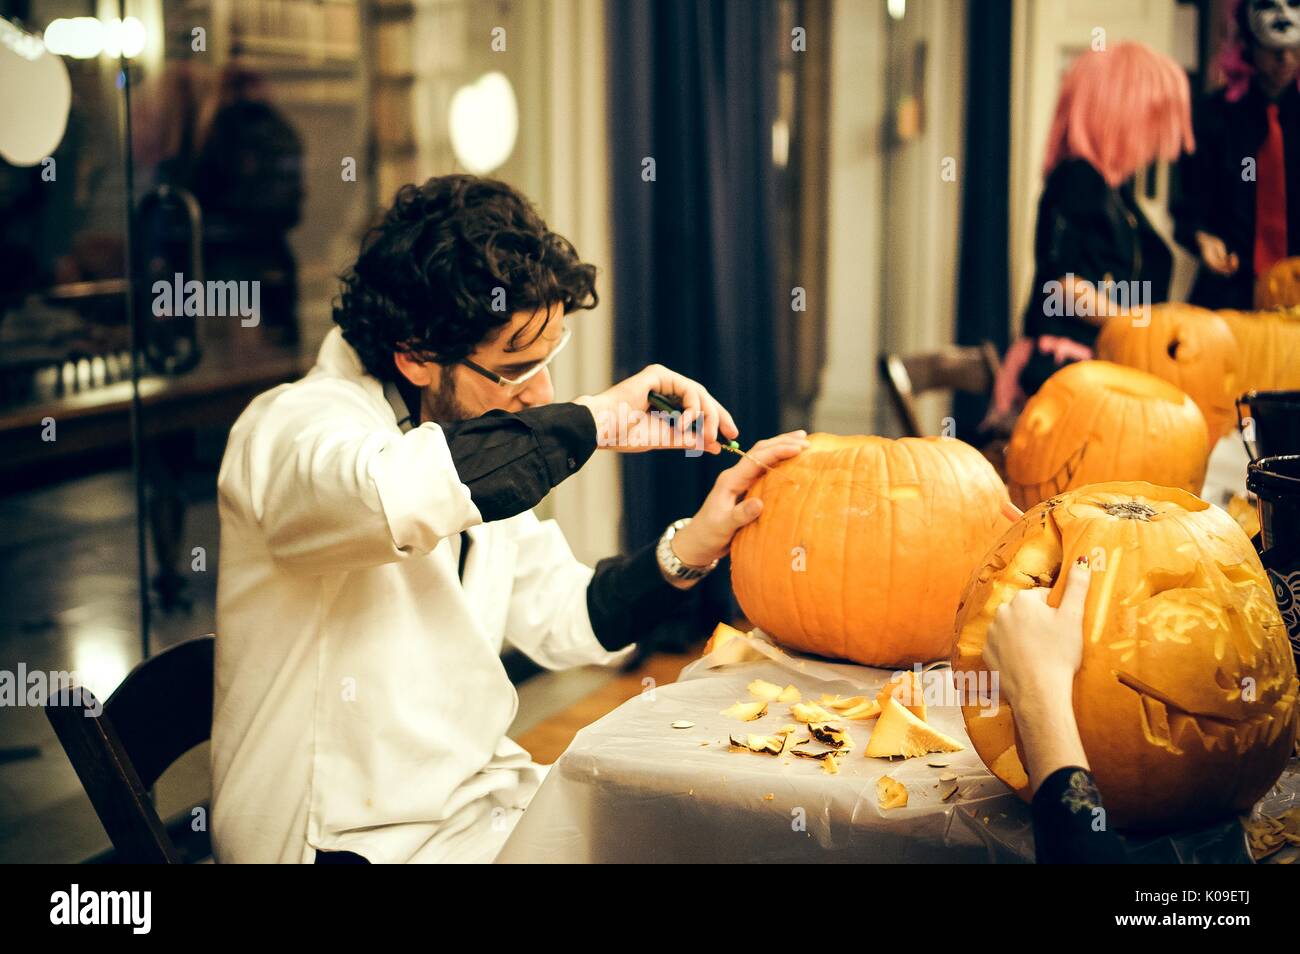 Student seated around table carving a pumpkin with a knife, surrounded by other college students carving faces into pumpkins, student wearing a white smock atop clothing, Peabody Halloween party, October 31, 2015. Courtesy Eric Chen. Stock Photo